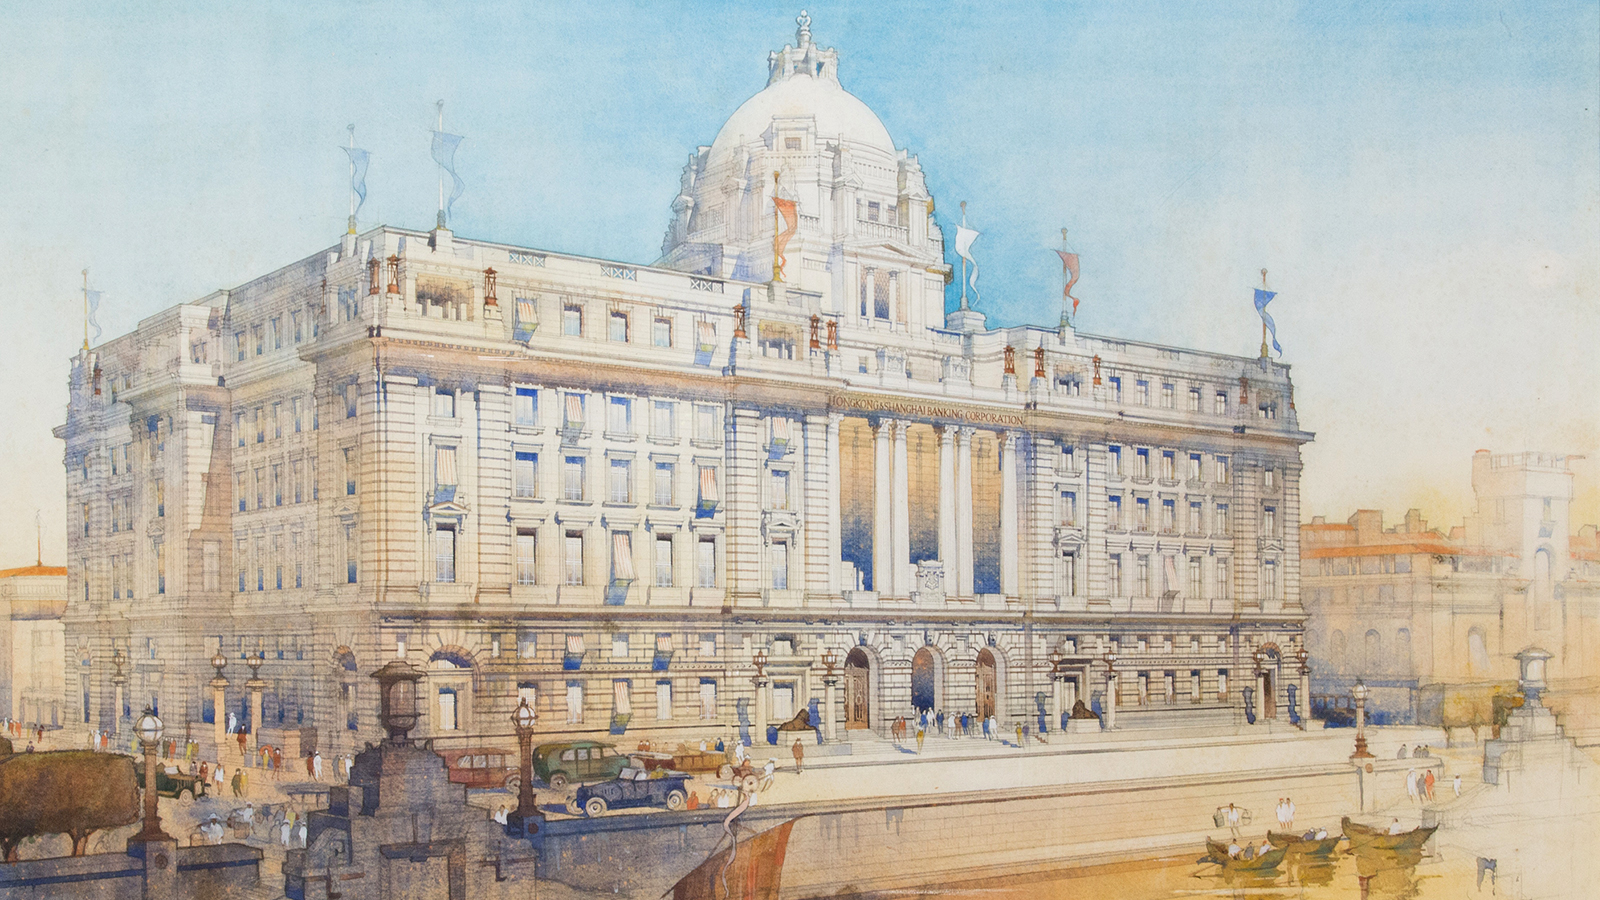 A perspective drawing of the HSBC office on the Bund, Shanghai’s historic waterfront, completed in 1923